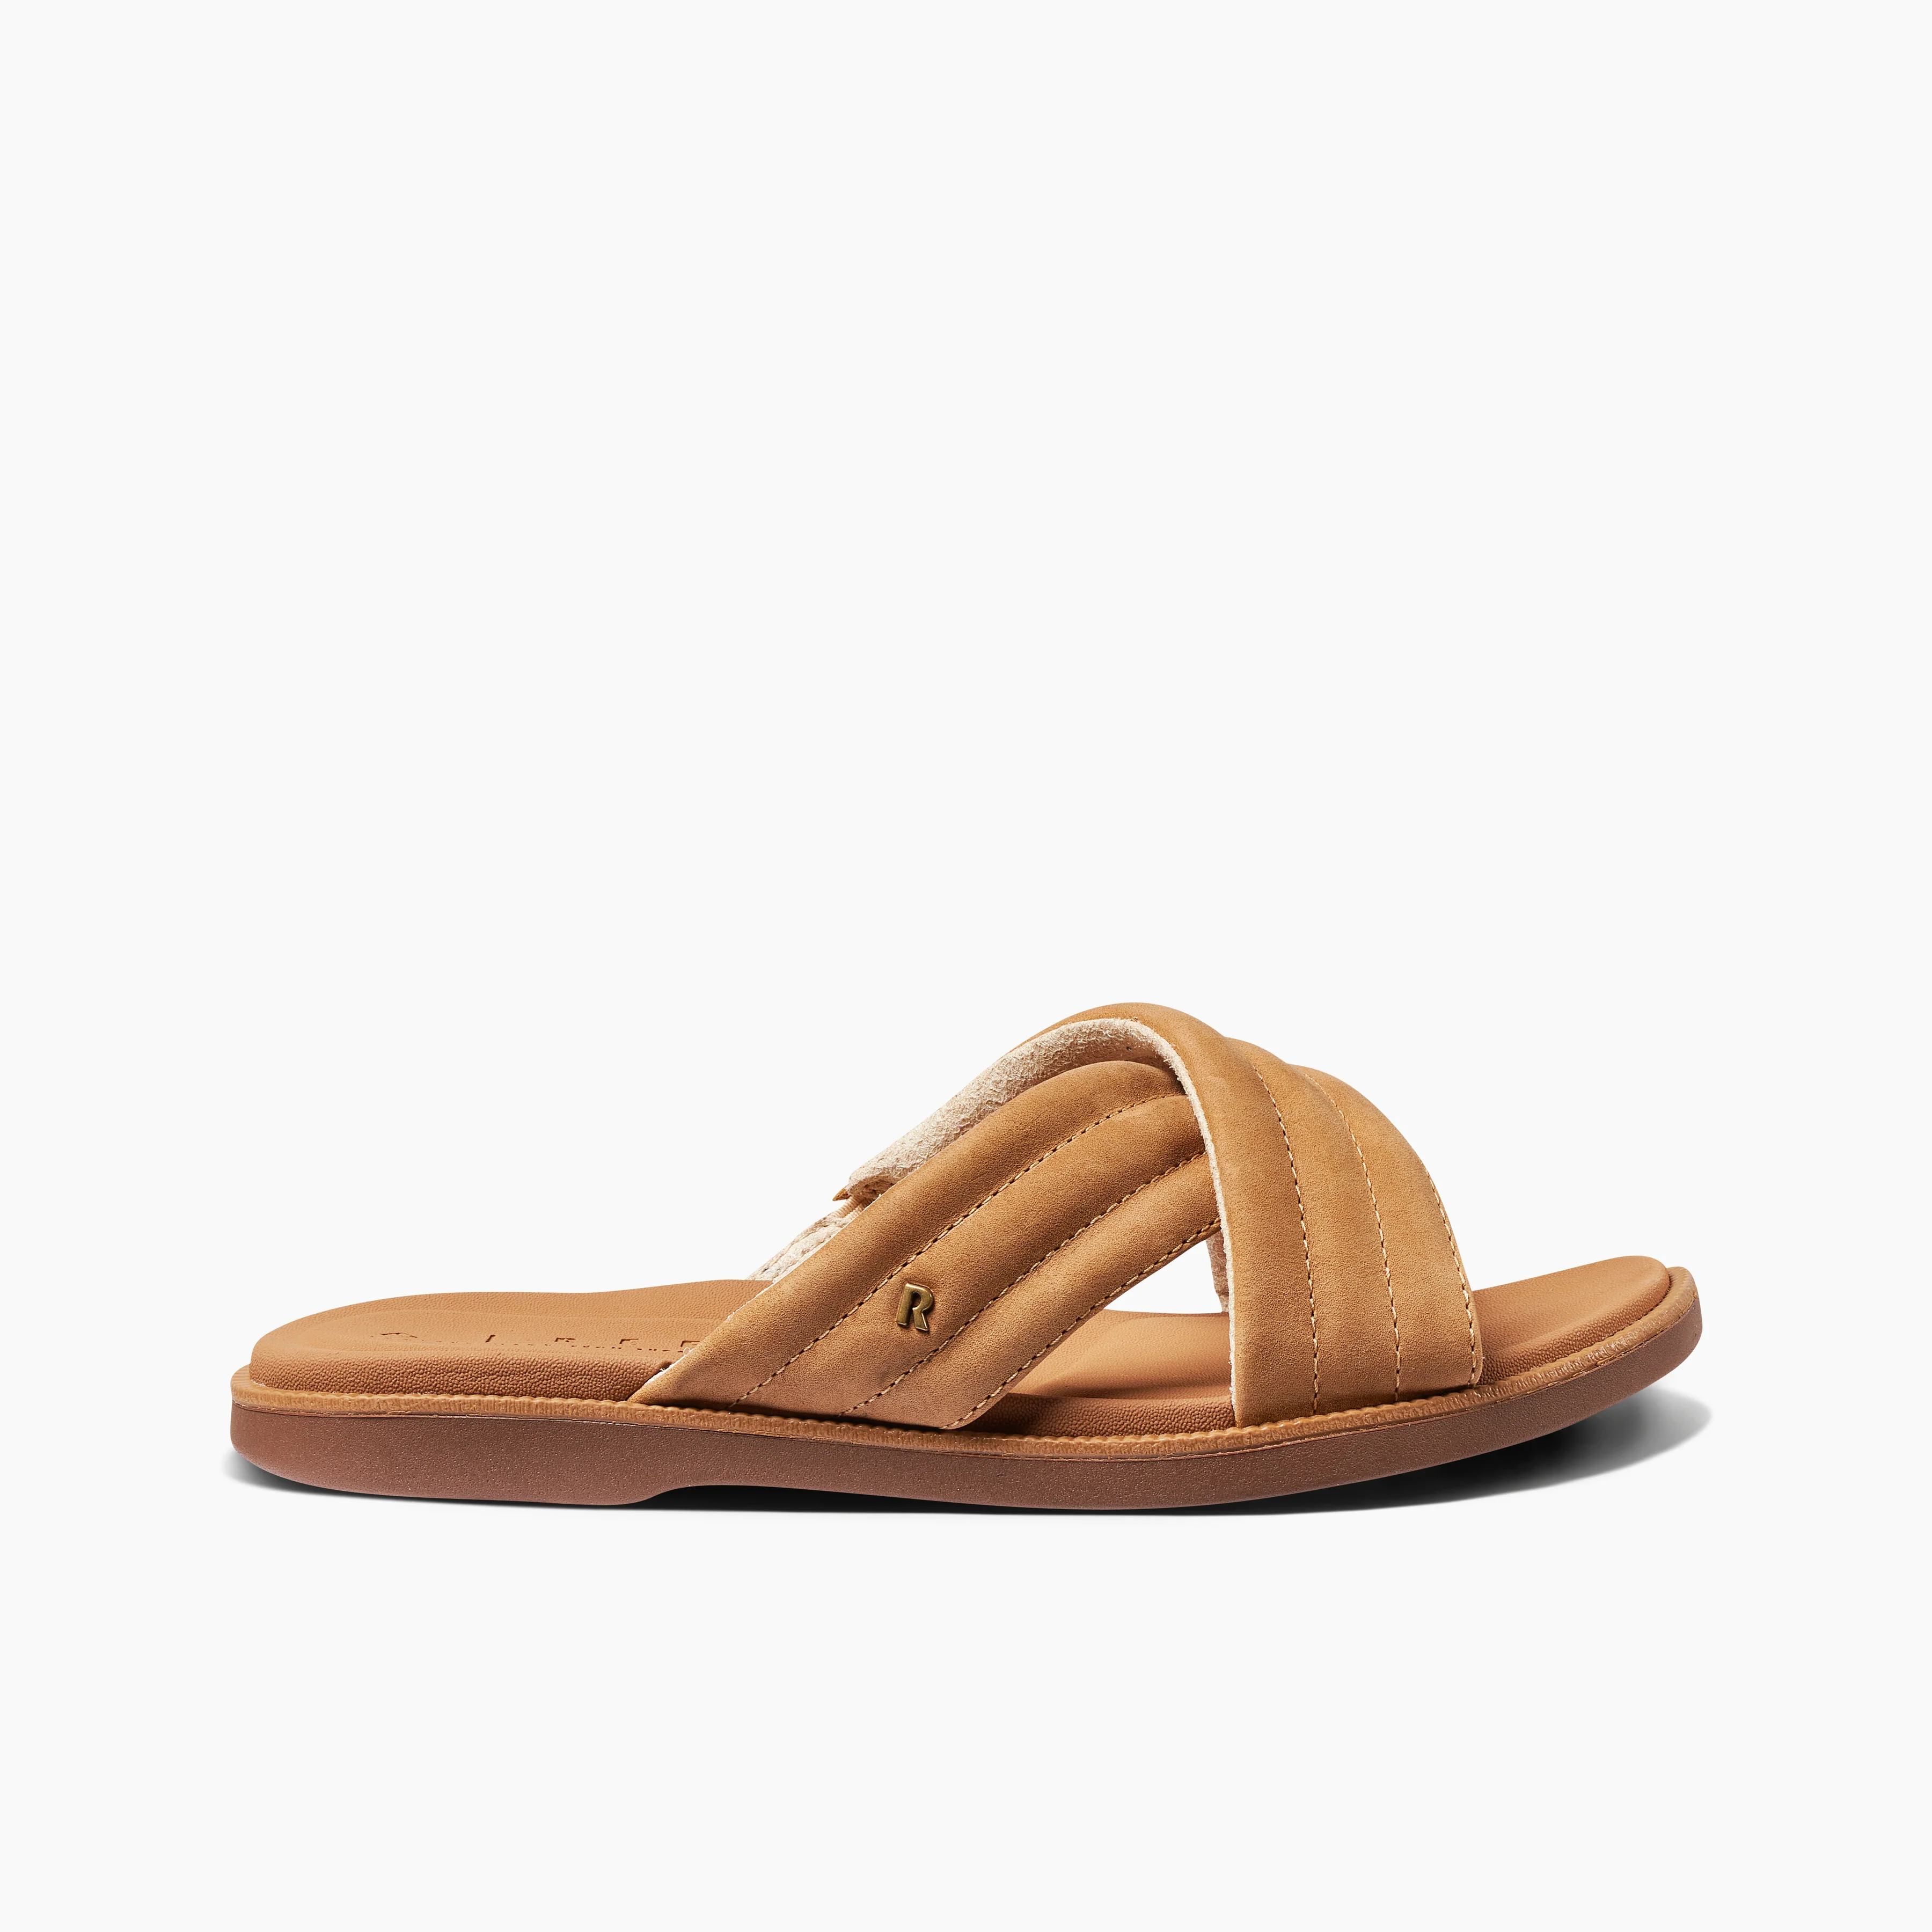 Women's Lofty Lux X Sandals in Natural side view